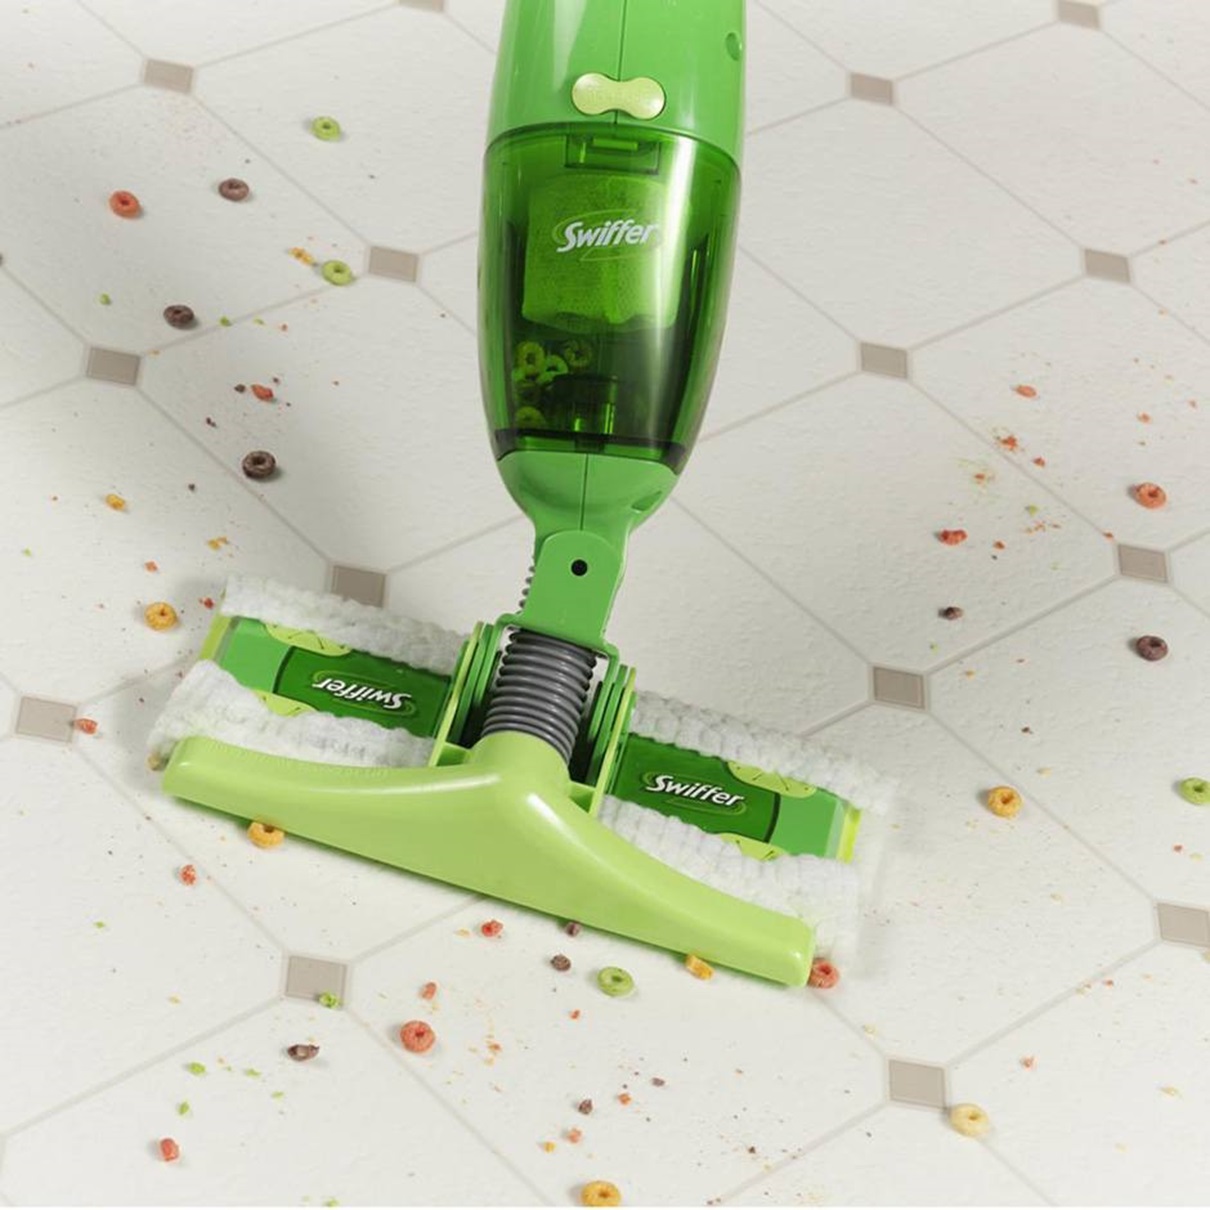 Swiffer Sweep and Vac Vacuum Cleaner for Floor Cleaning 